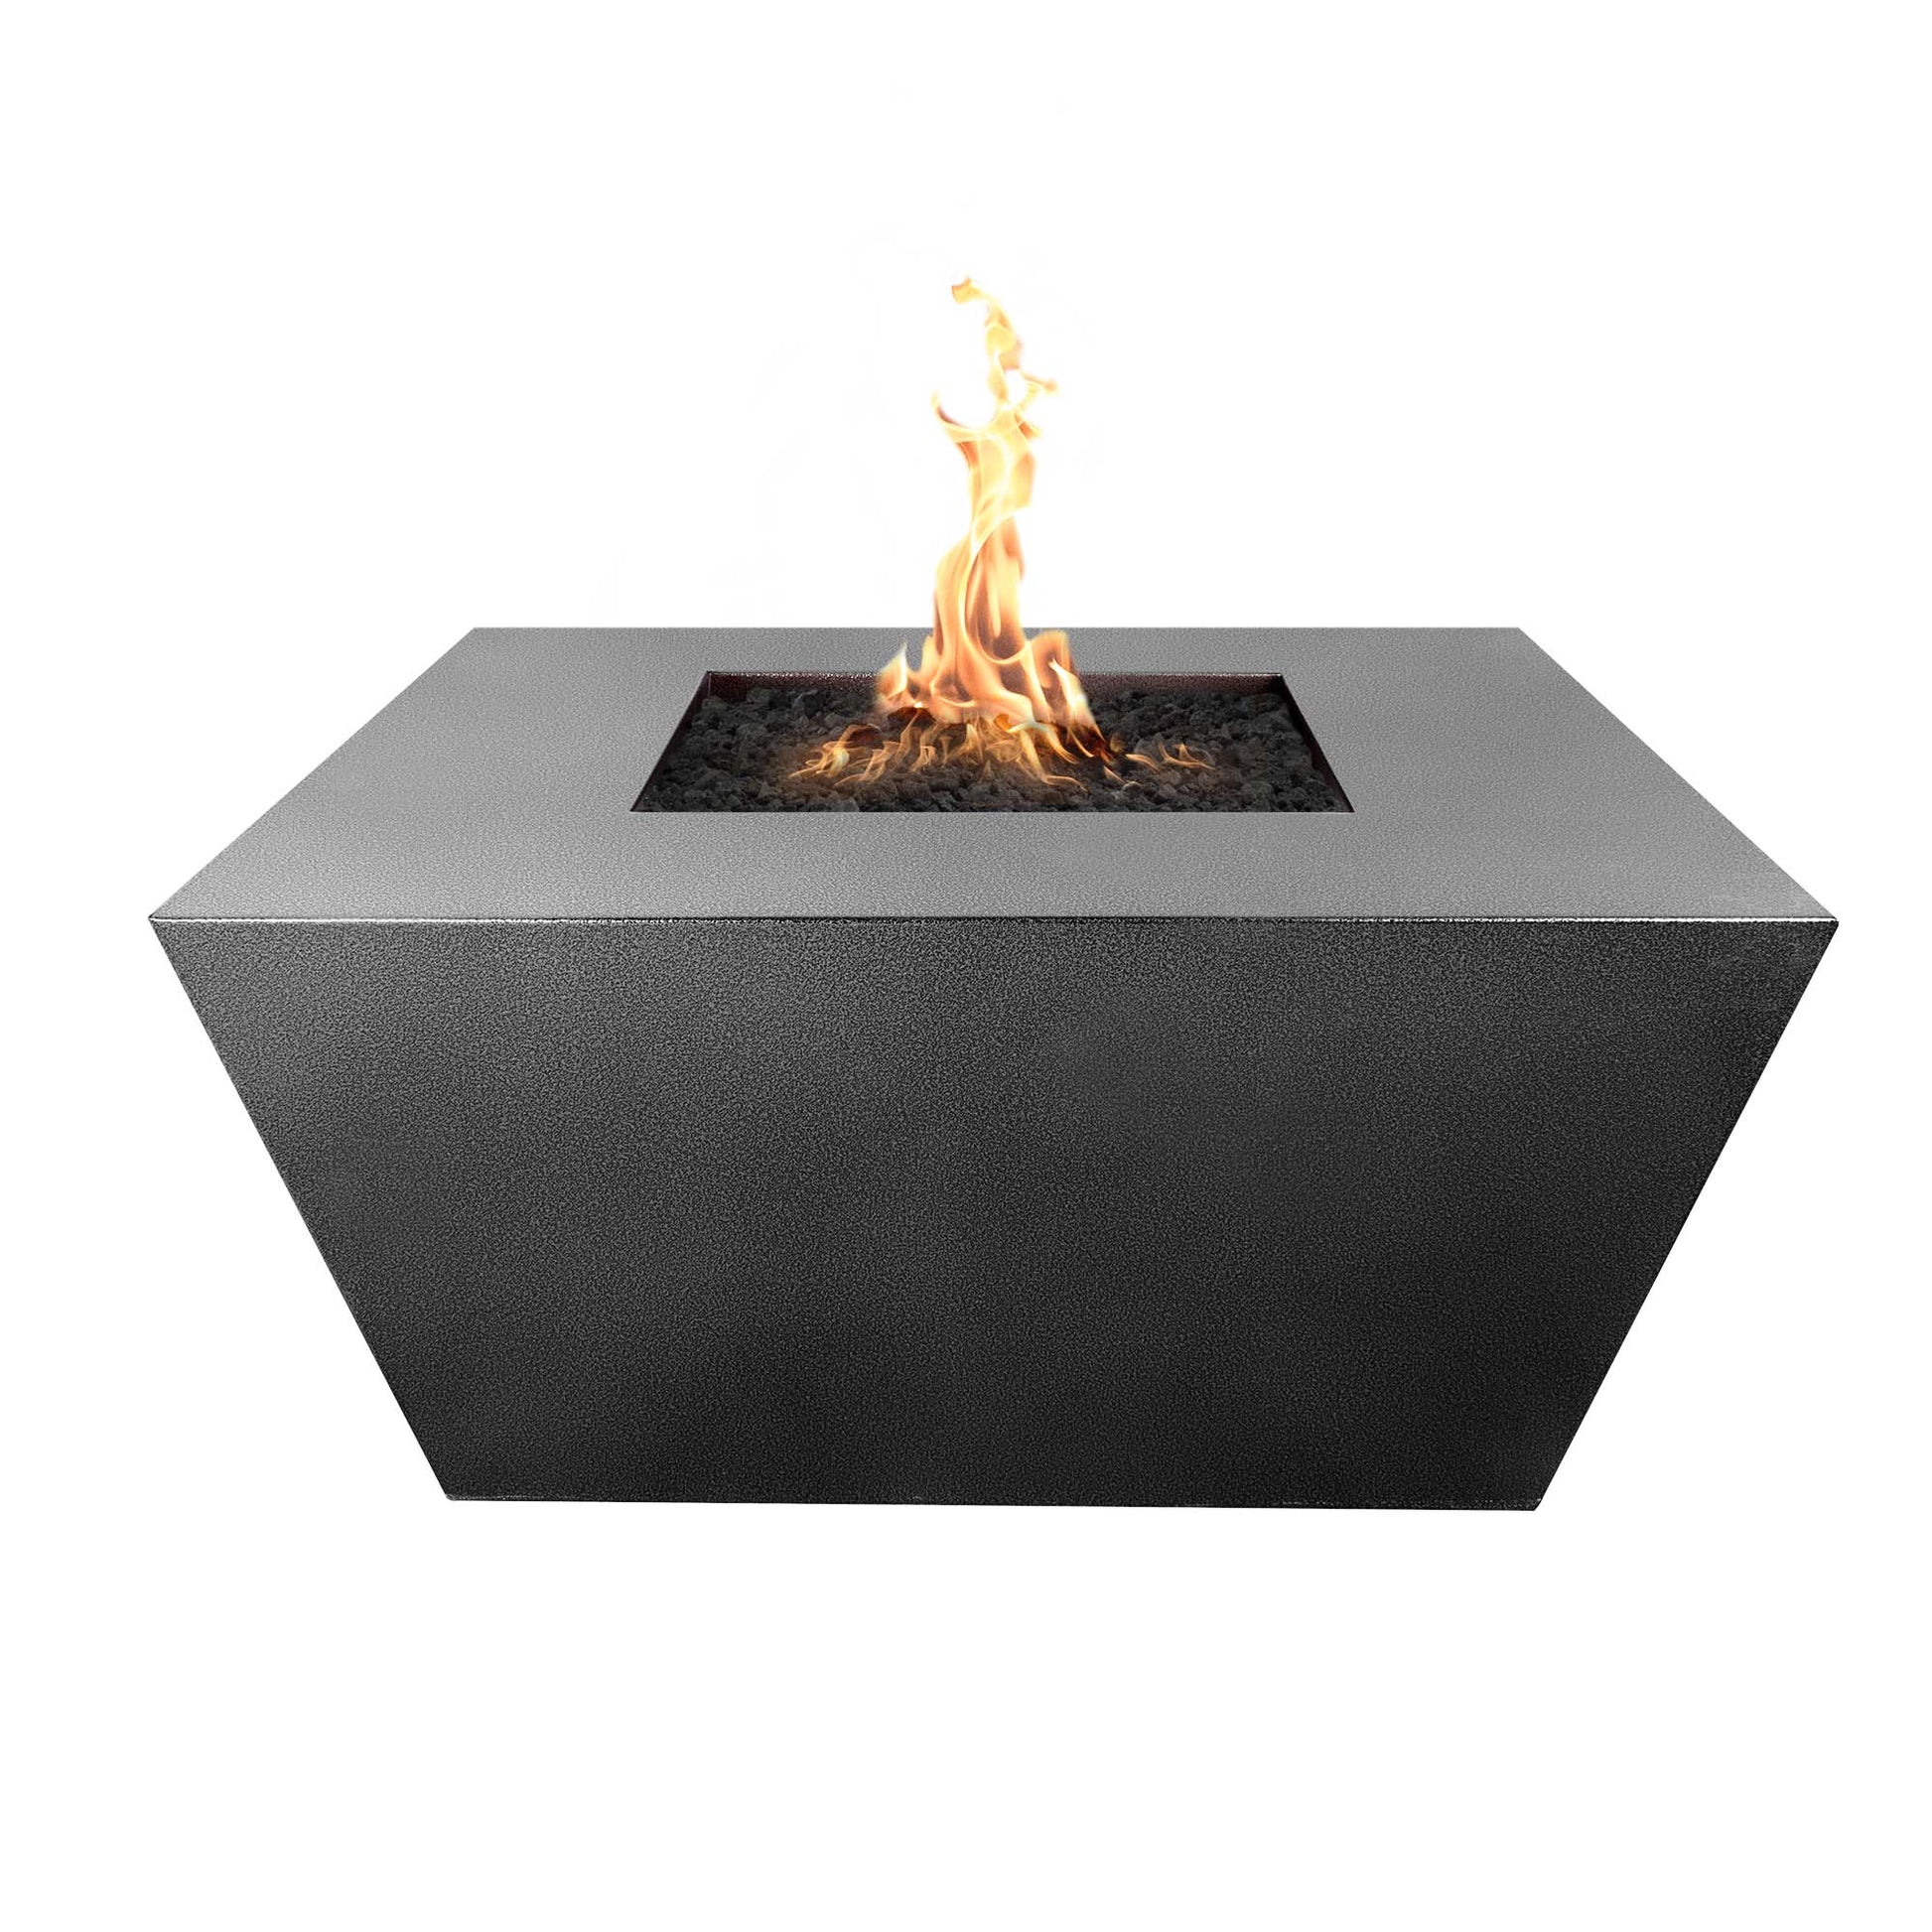 The Outdoor Plus Square Redan 36" Corten Steel Liquid Propane Fire Pit with Match Lit Ignition